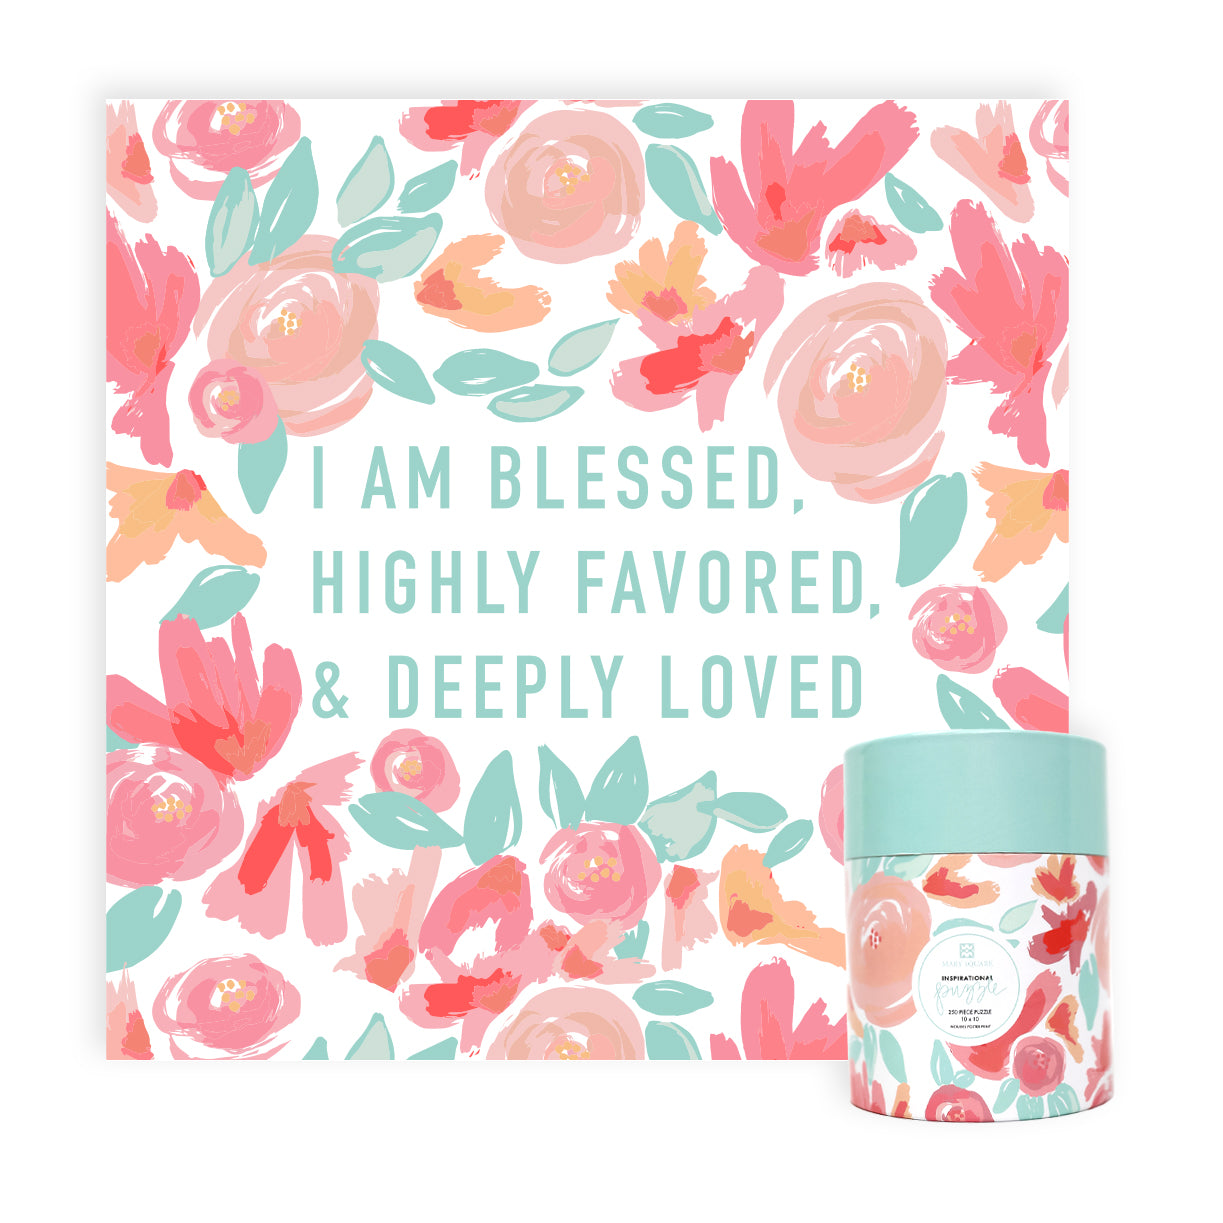 I Am Blessed Mini Inspirational Puzzle - Mary Square, LLC